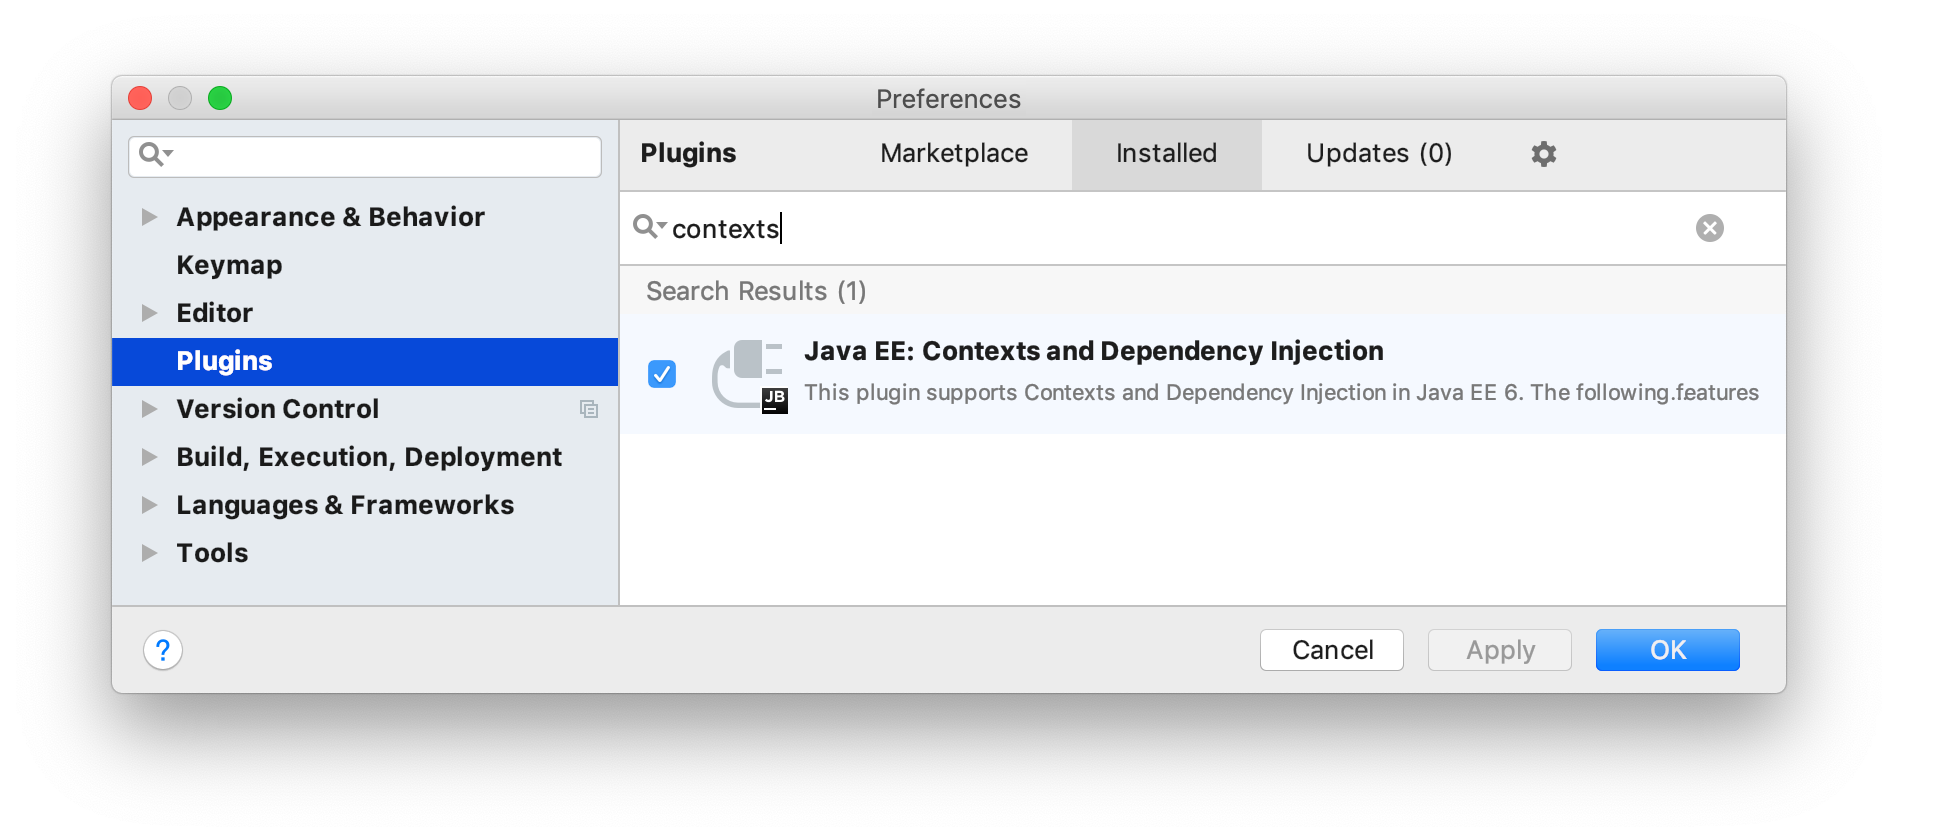 CDI plugin is enabled in the list of plugins